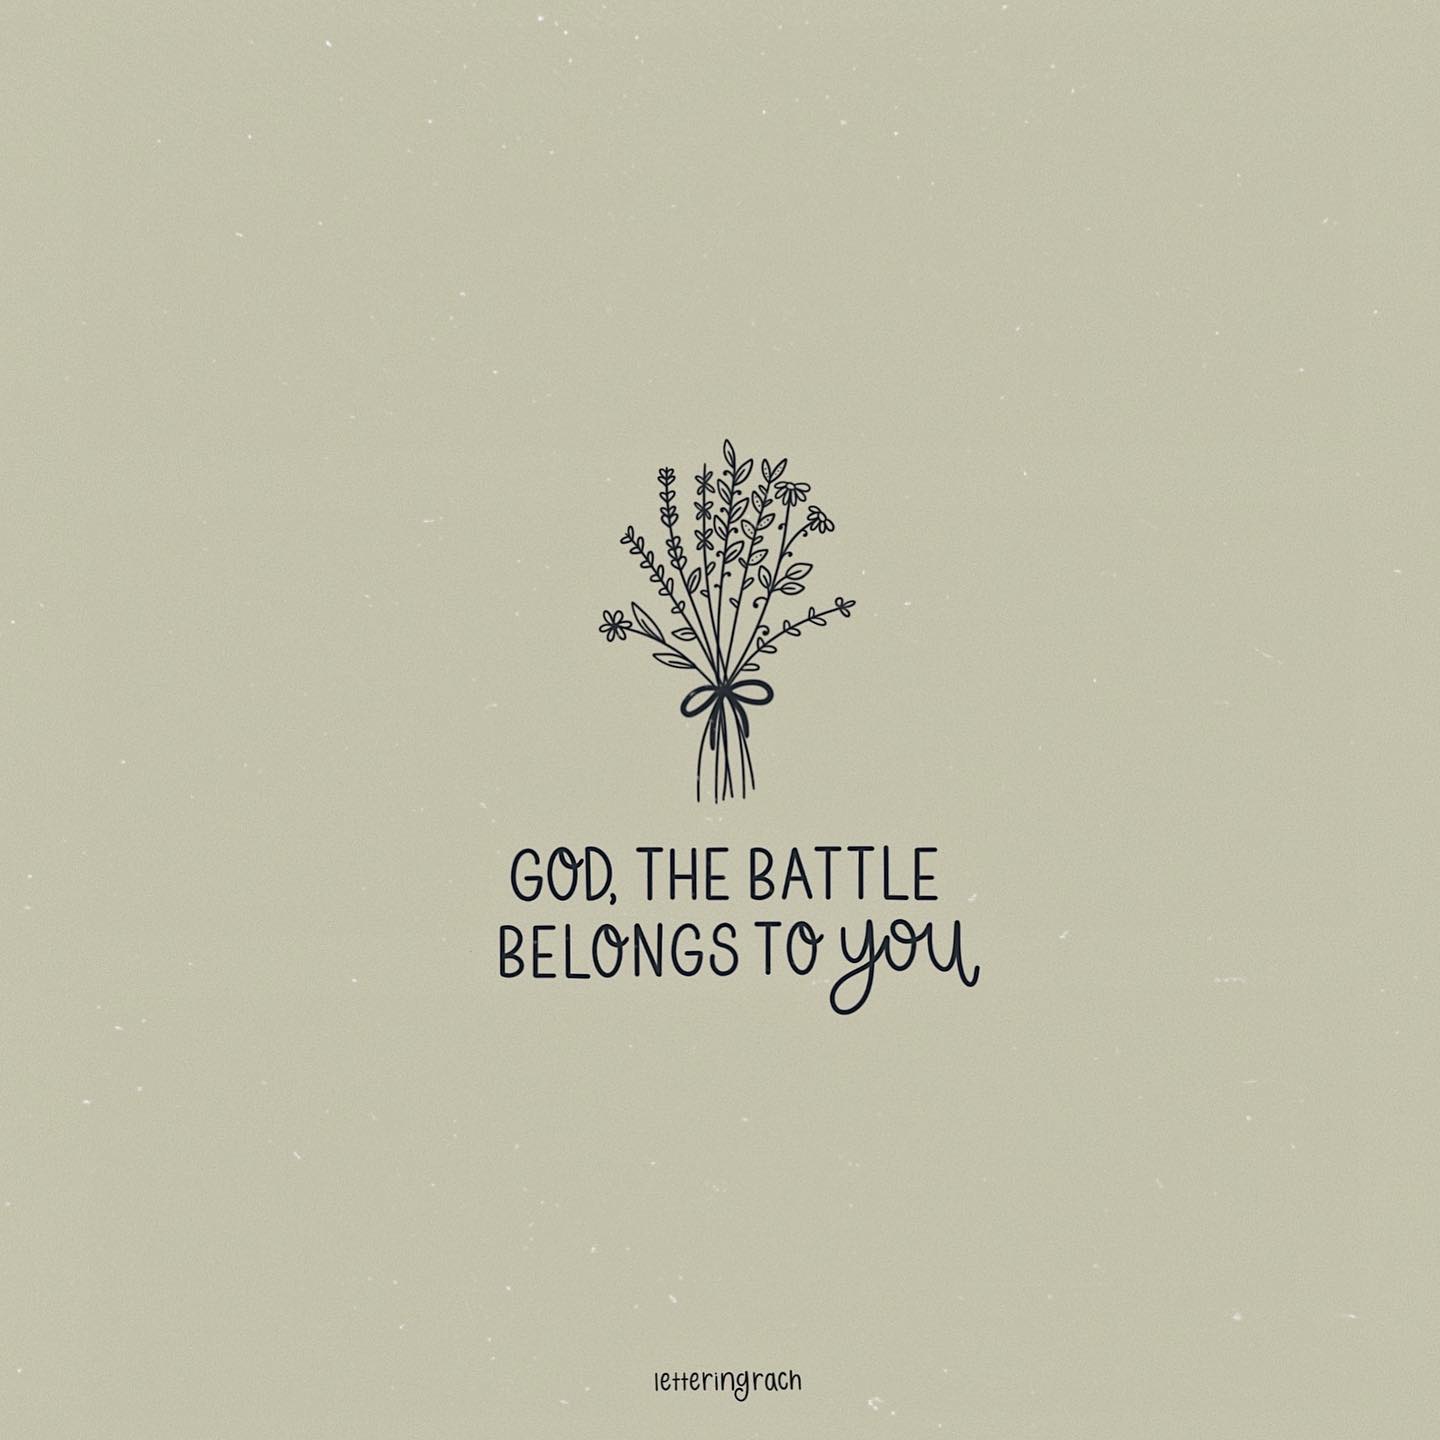 The battle belongs to the Lord! — 2 Chronicles 20:15 || And he said ...